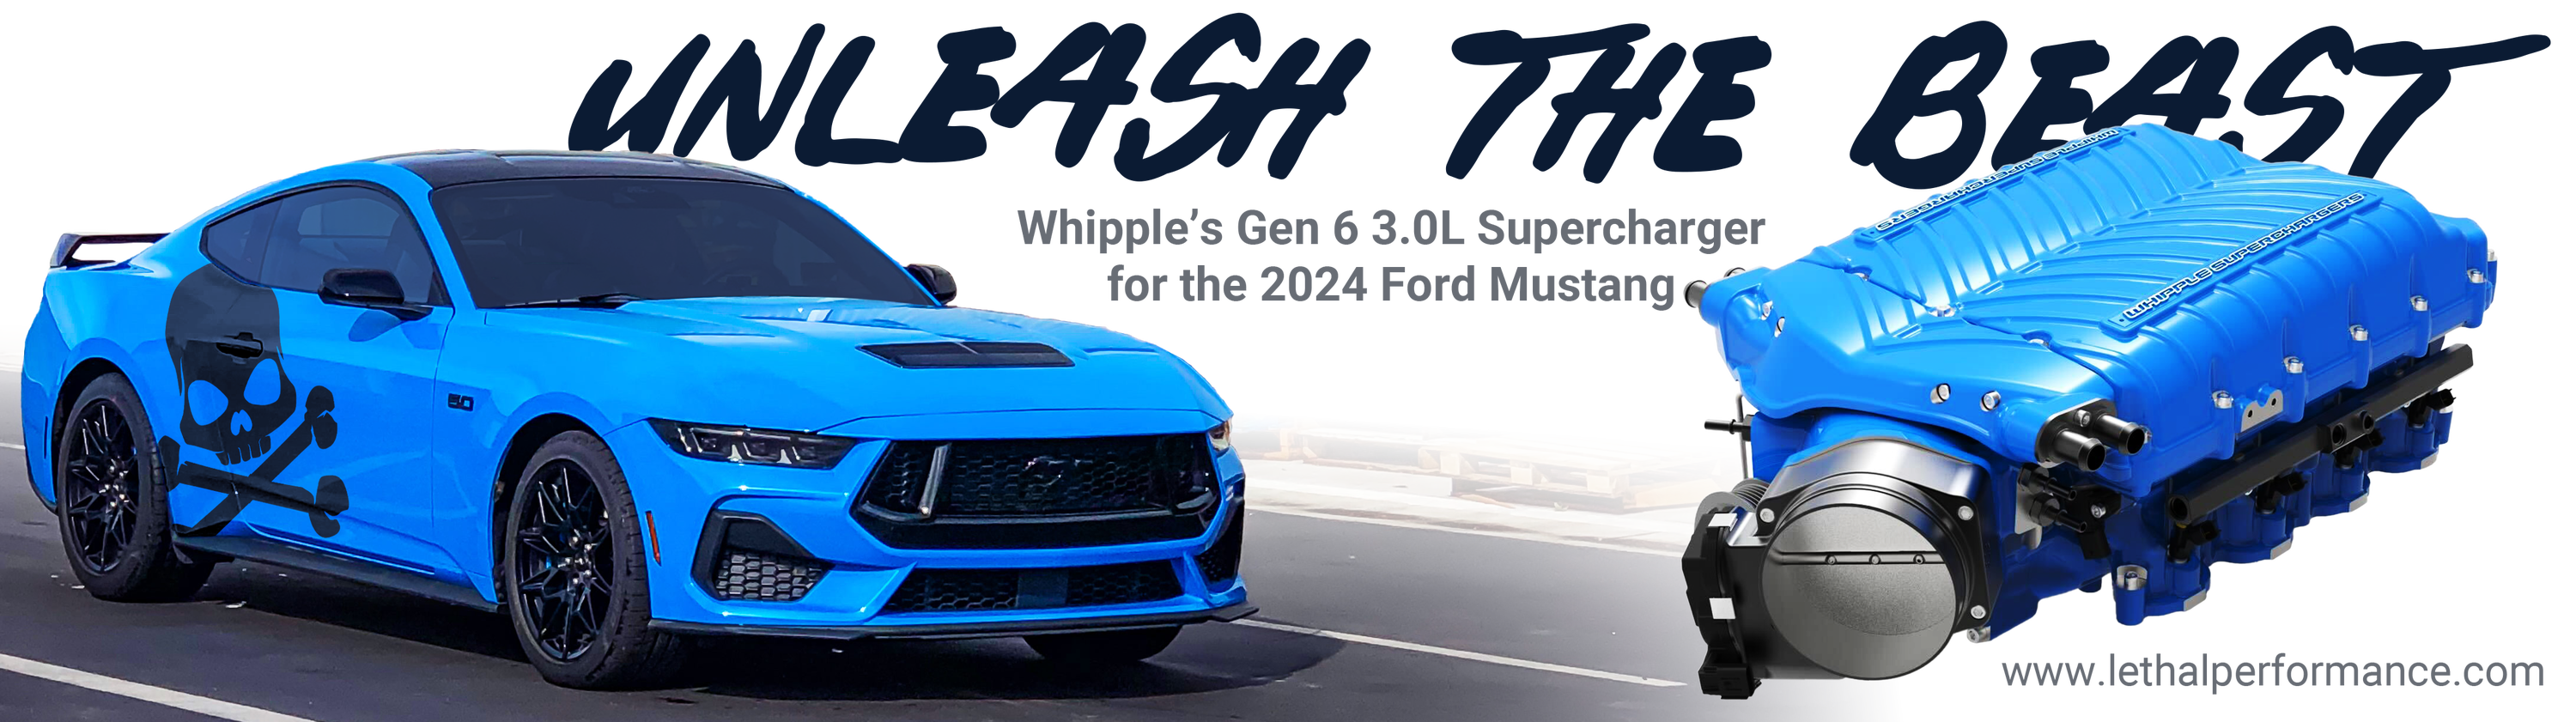 S650 Mustang The ALL NEW GEN 6 Whipple Supercharger for 2024 Mustang! 2024mustang_whipple_header